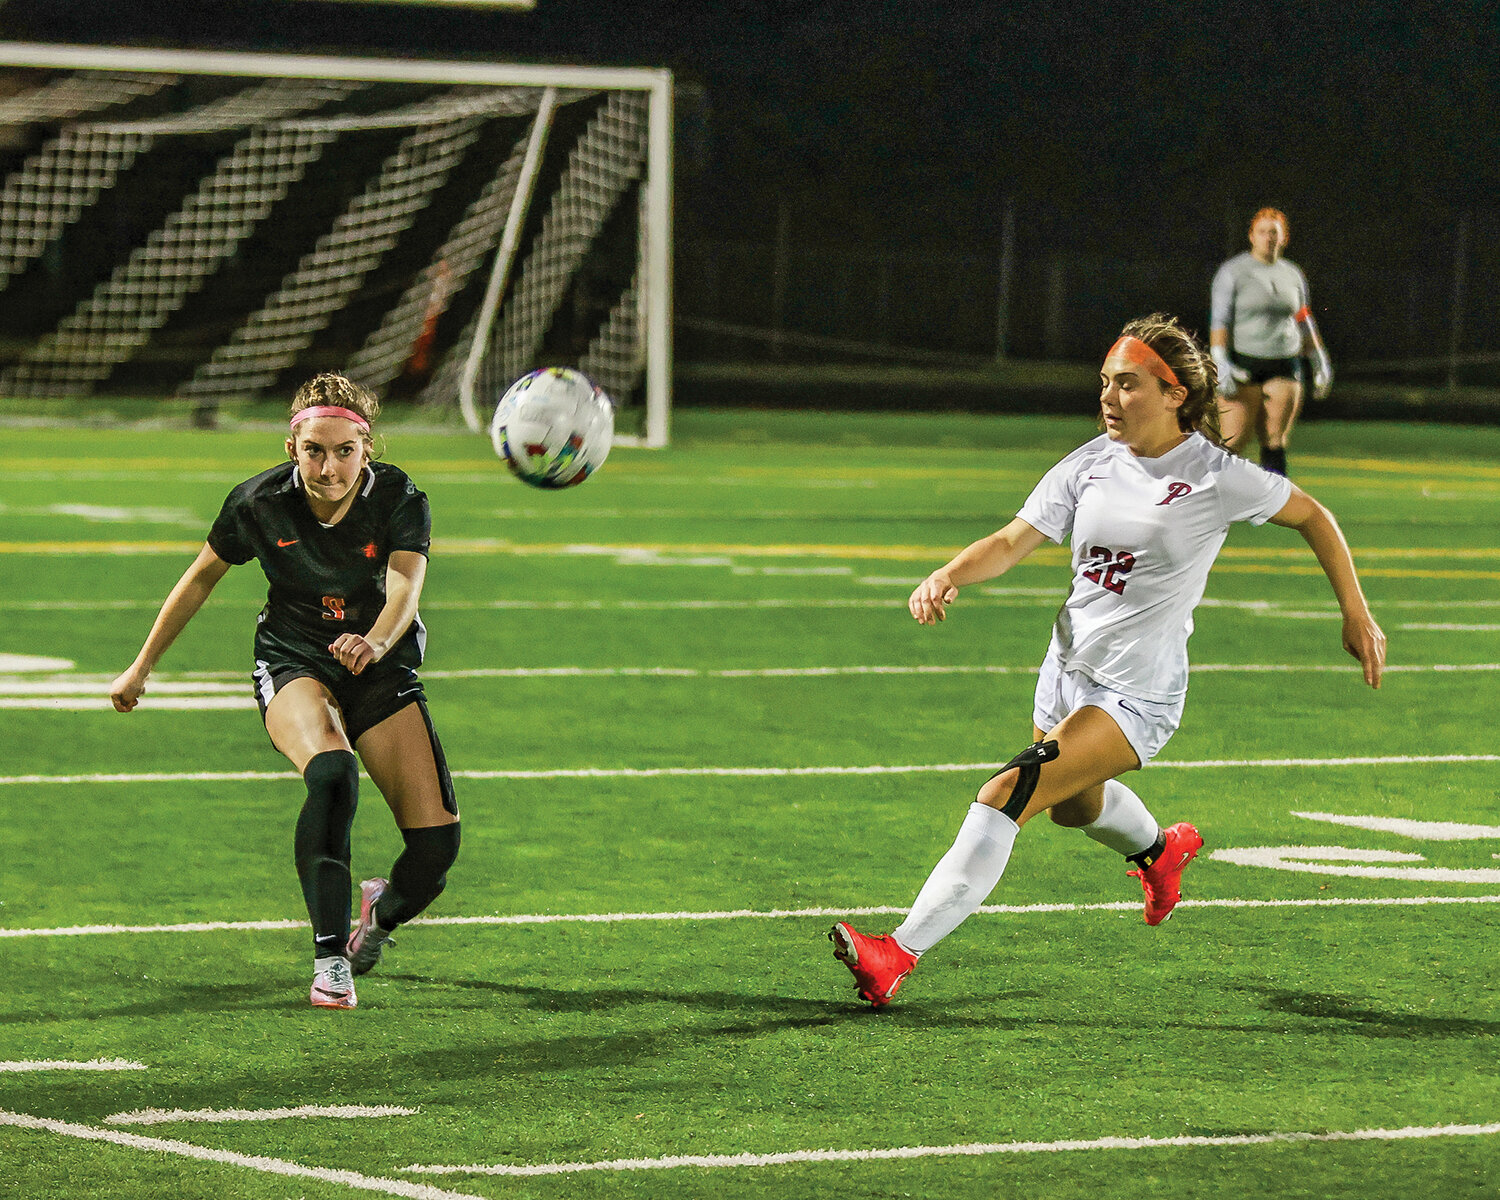 Battle Ground’s Isabella Brenes kicks the ball downfield with Prairie’s Avery Hoskins nearby on defense during the district rivals’ 0-0 draw on Tuesday, Oct. 17.